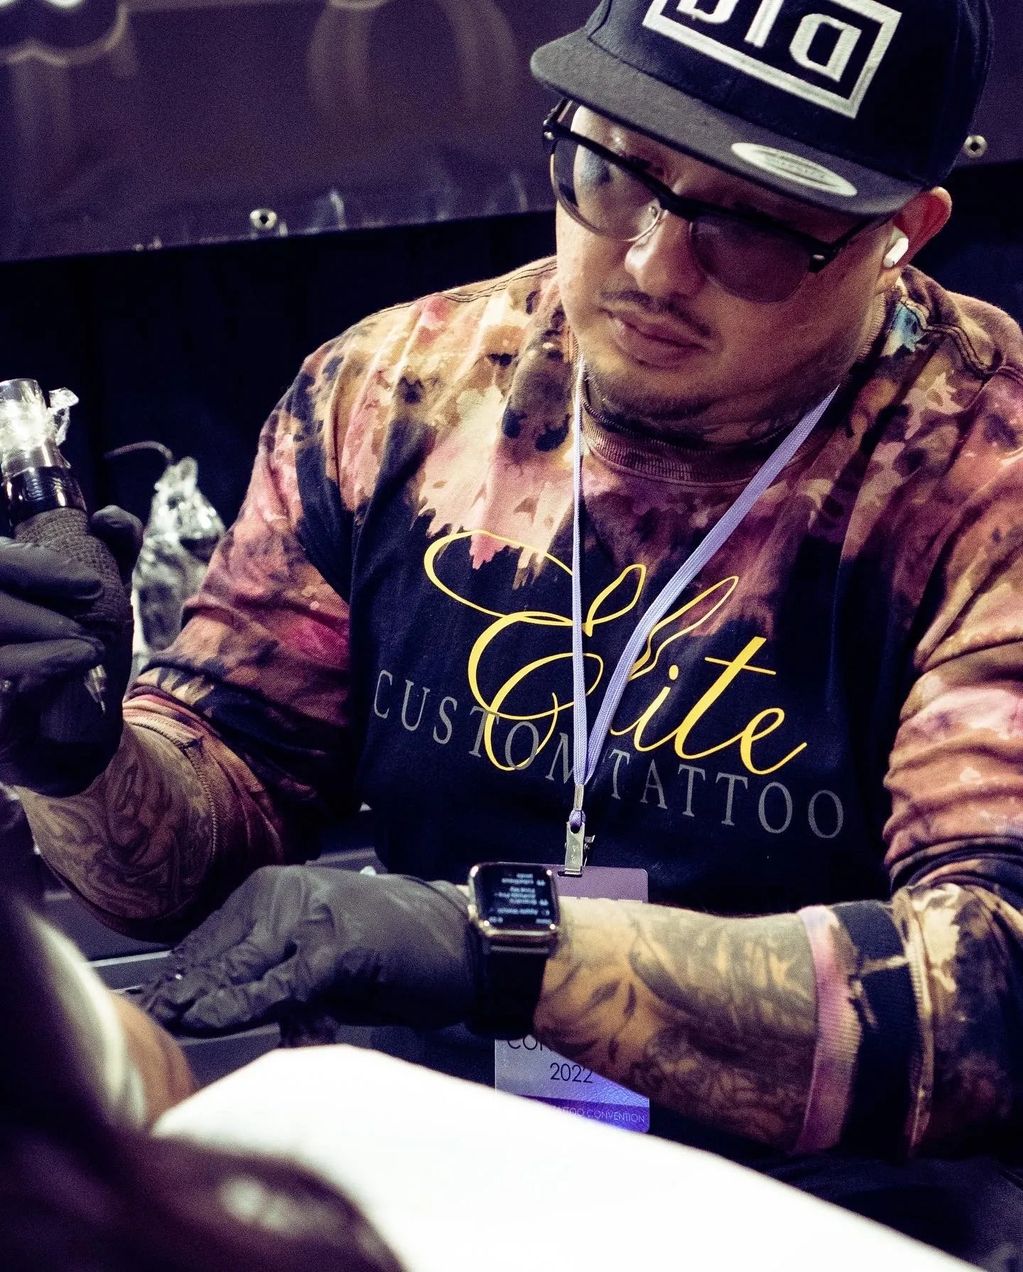 Rebellious King tattooing at the Northern Colorado Convention. He took home two awards that day 2nd 